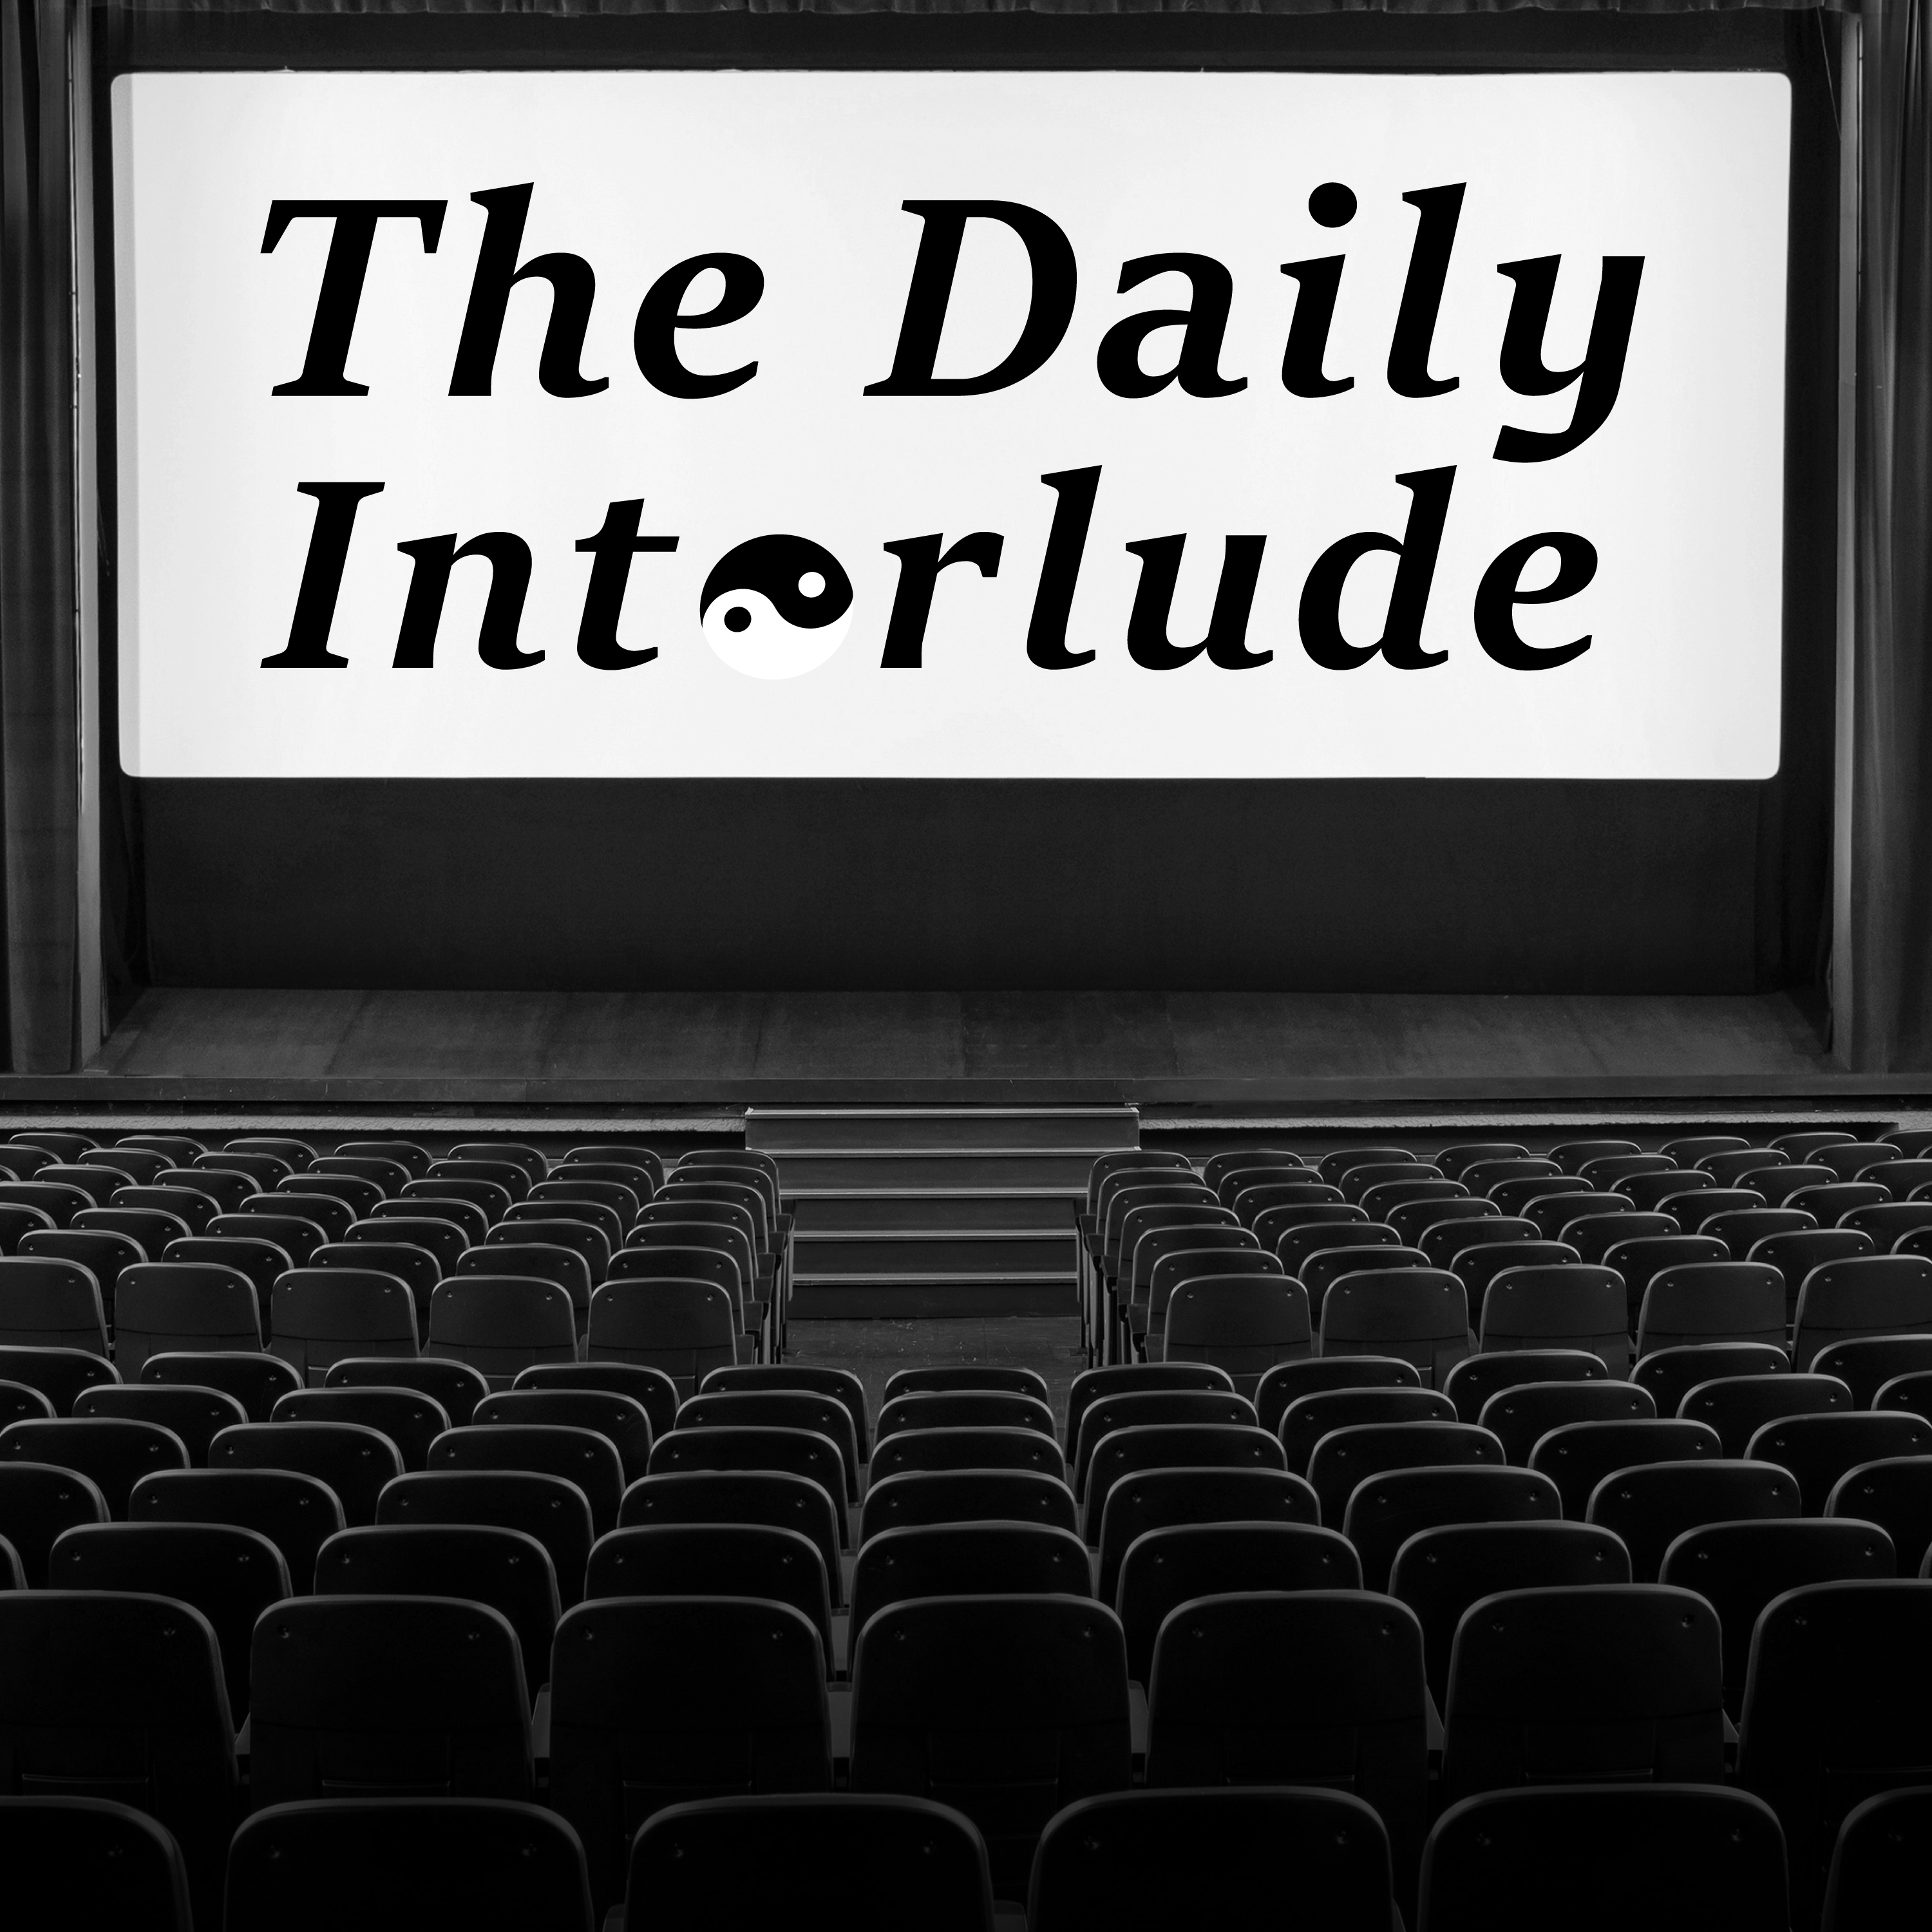 The Daily Interlude